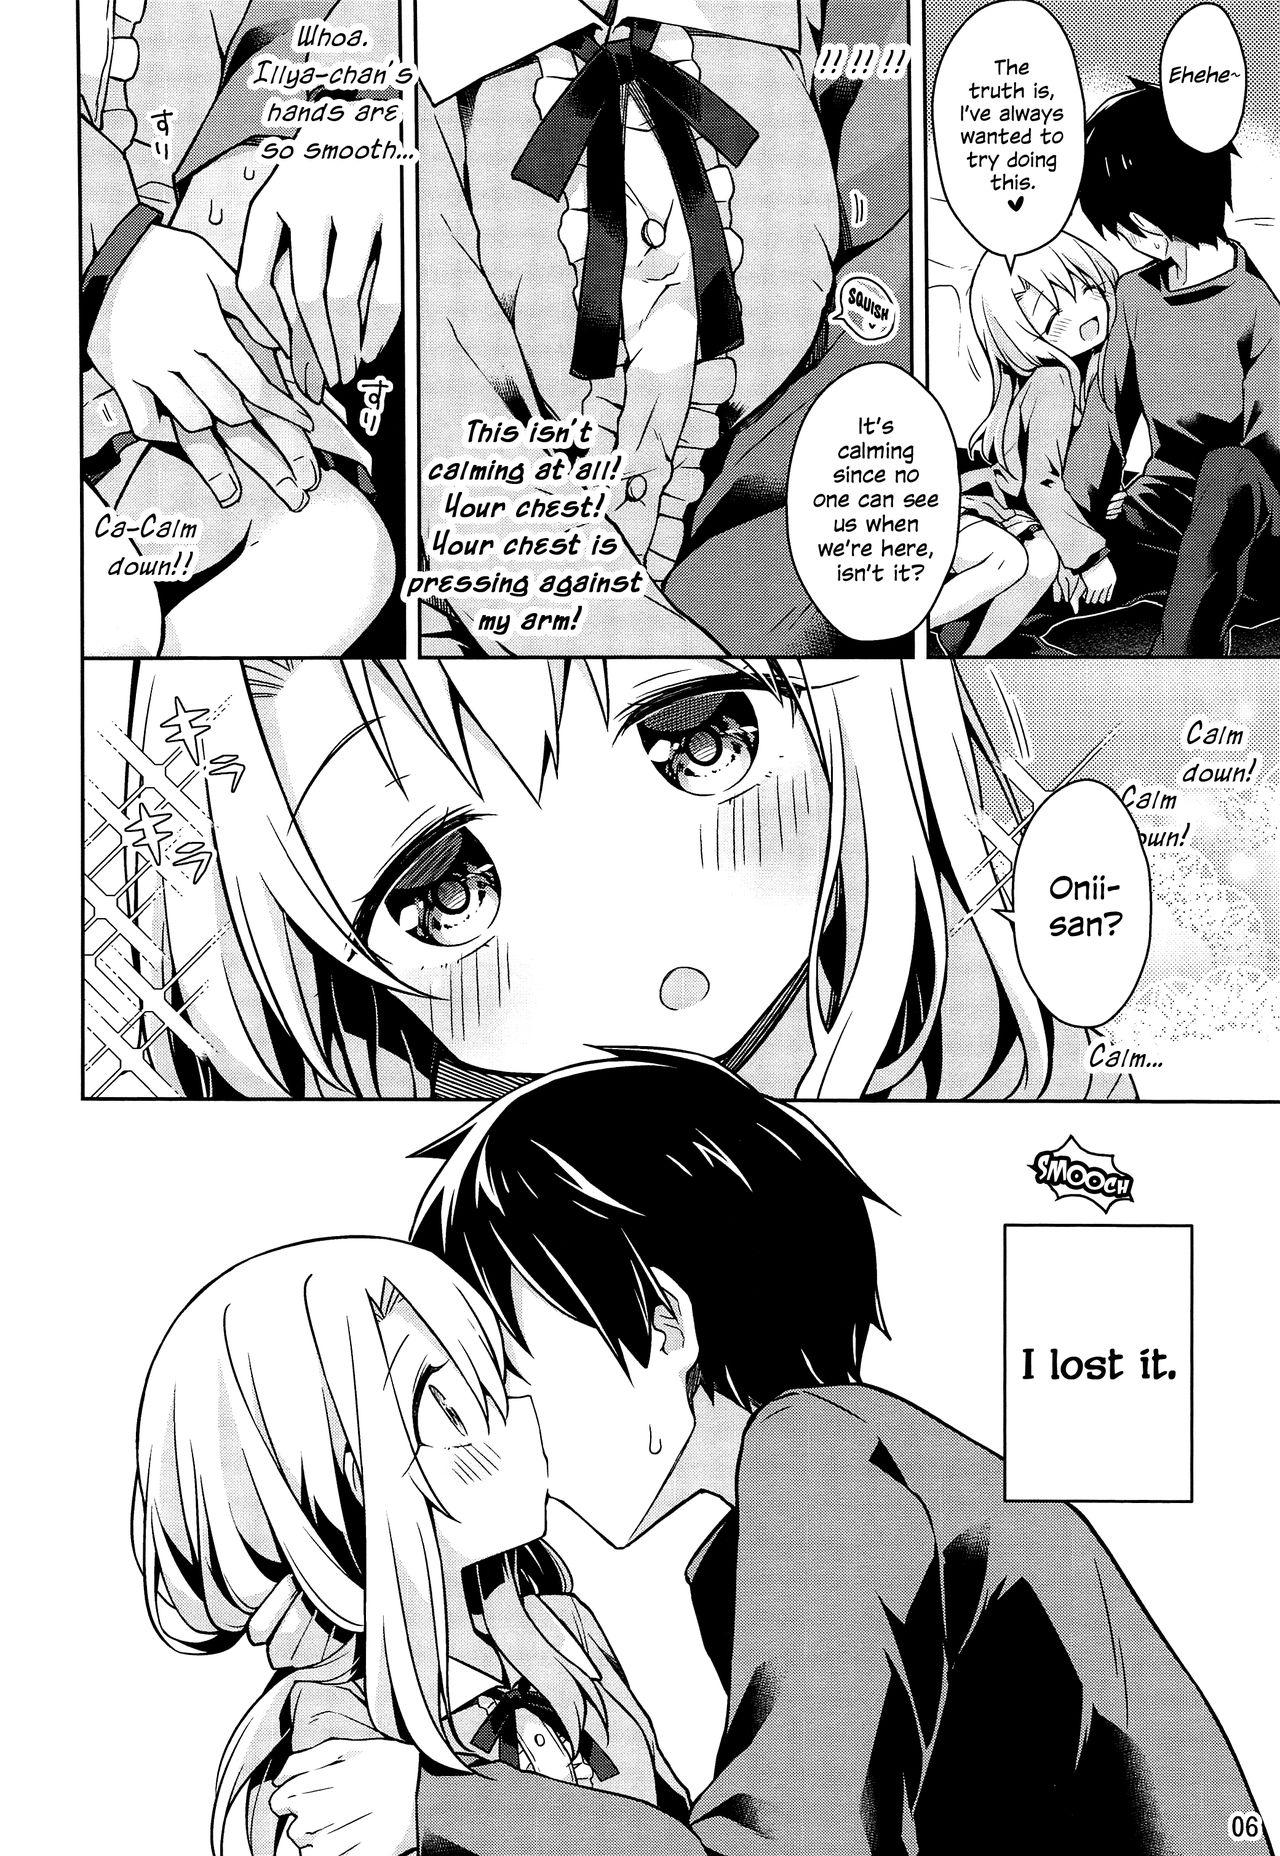 Casada Illya to Ouchi de Ecchi Shitai!! | I Want To Make Love With Illya At My Place!! - Fate kaleid liner prisma illya Phat - Page 7